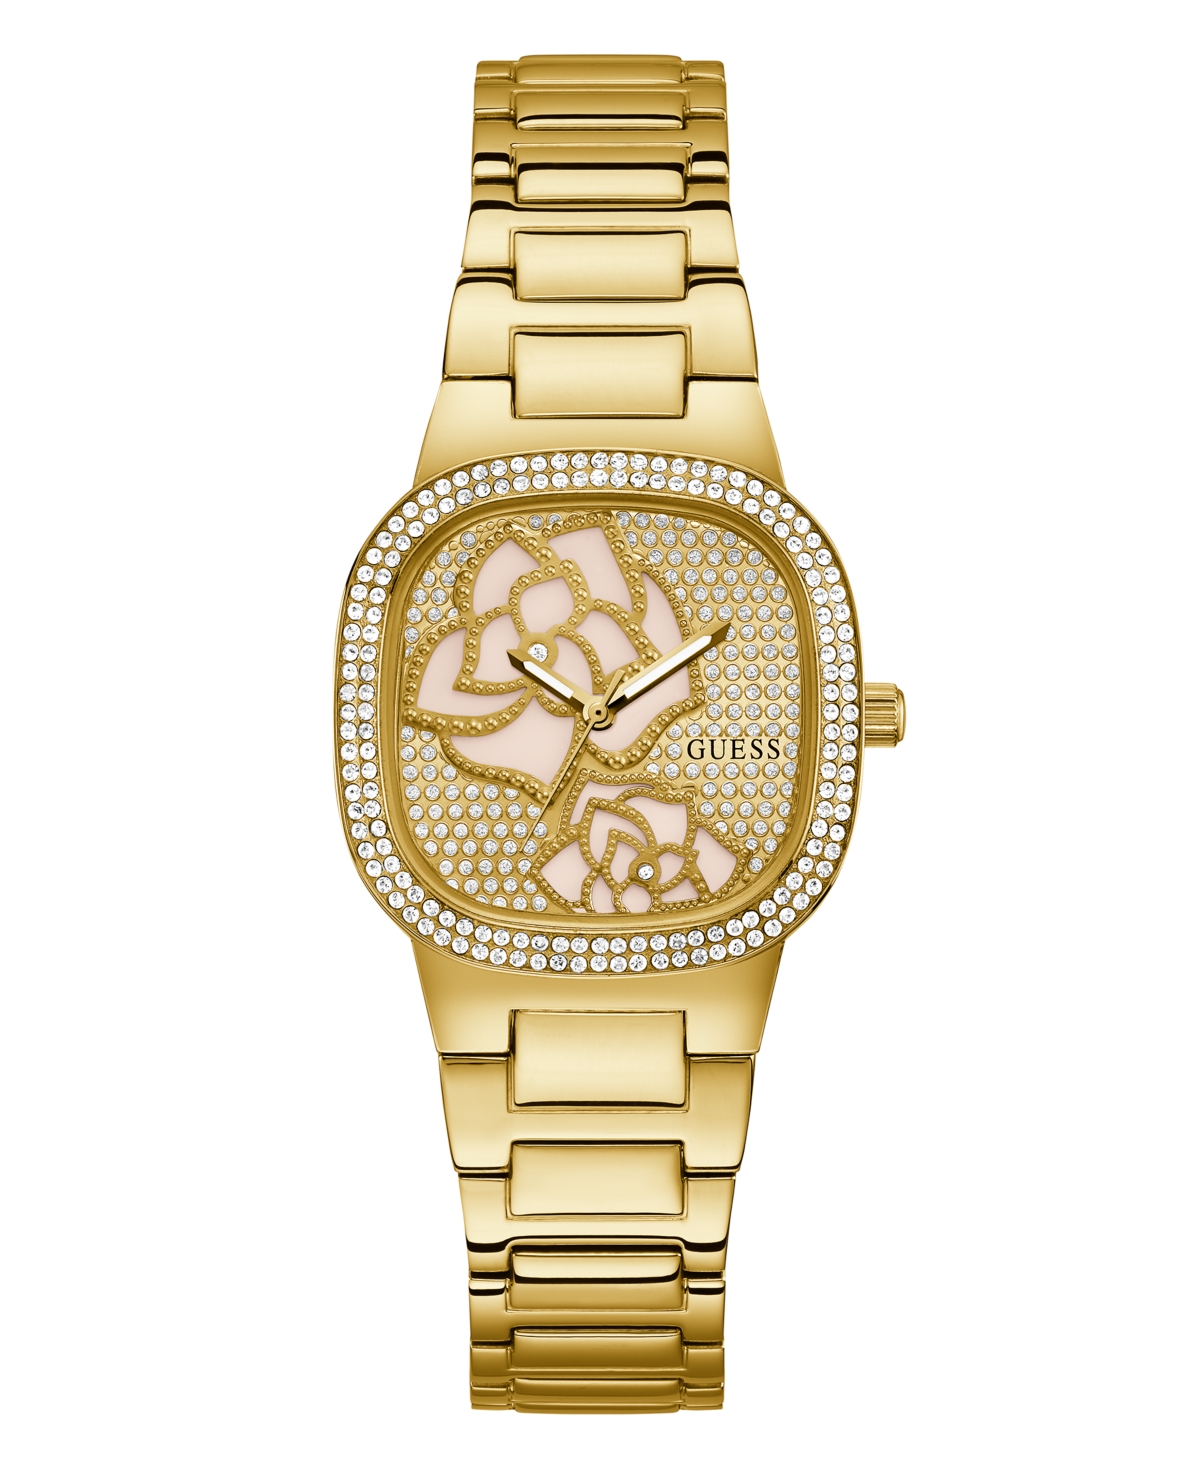 Guess Women's Three-hand Gold-tone Stainless Steel Watch 32mm